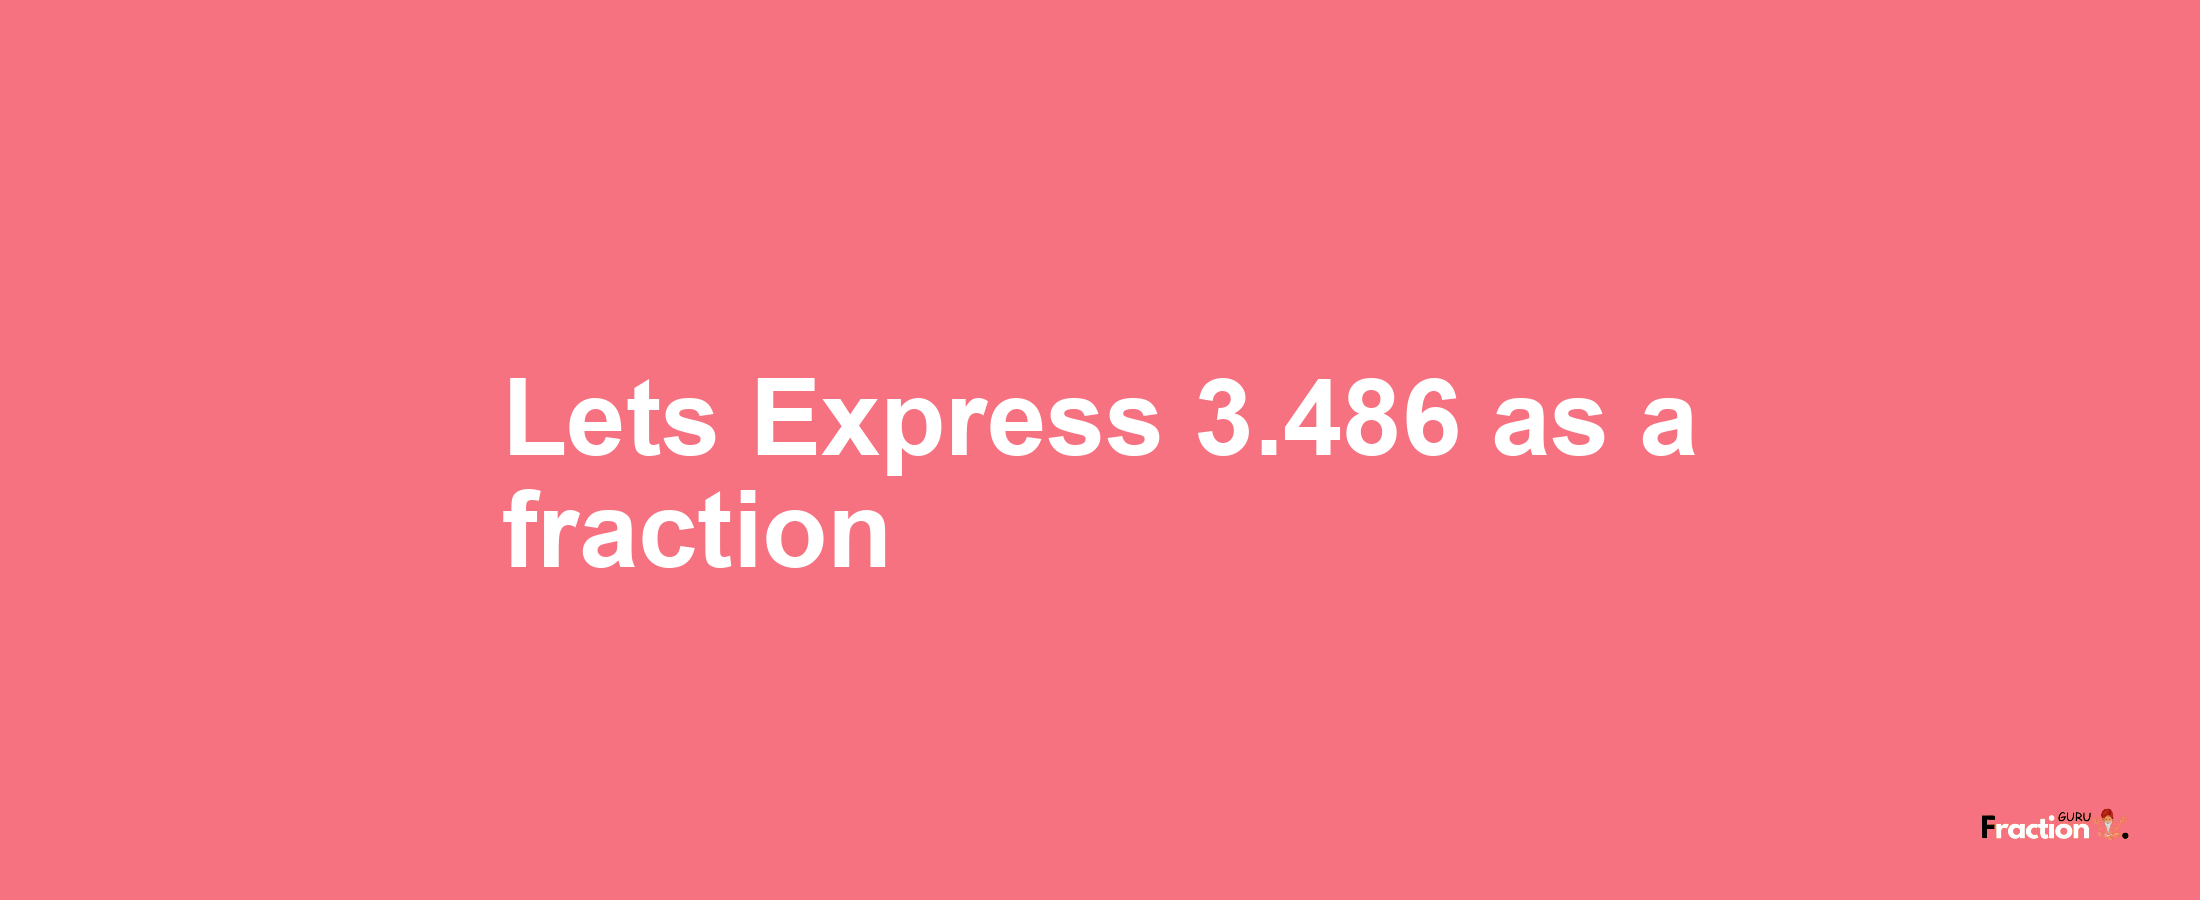 Lets Express 3.486 as afraction